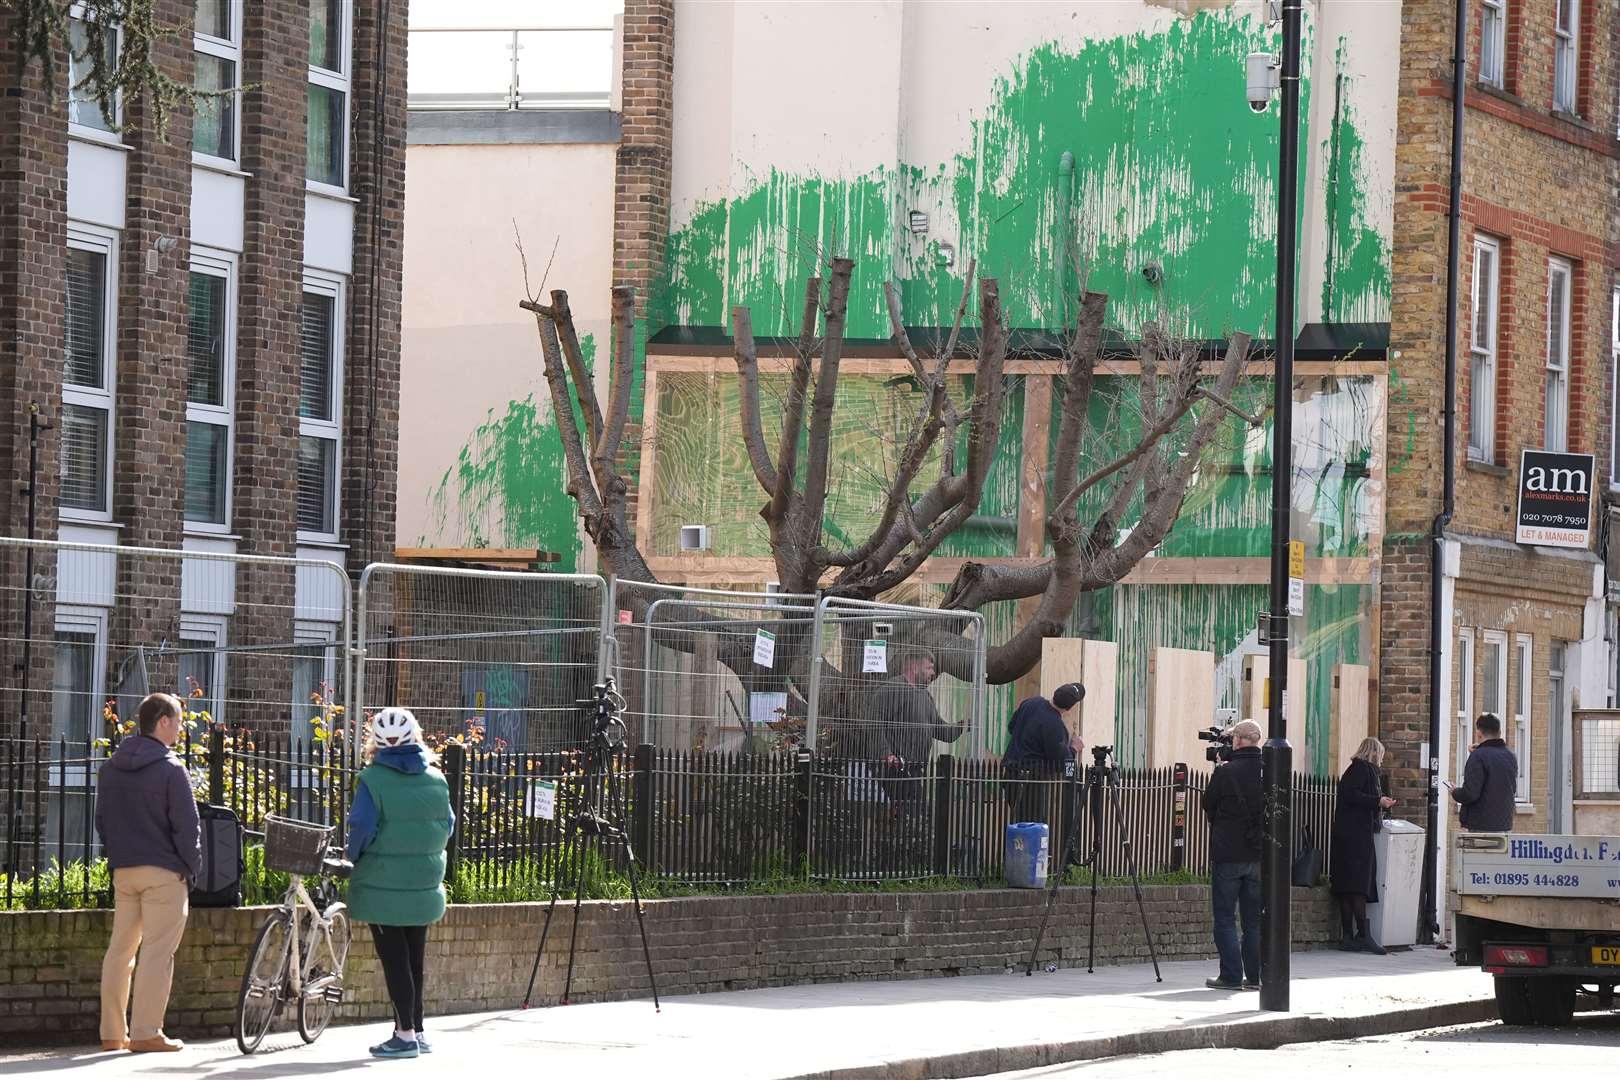 Fencing and plastic sheeting have been put up next to the Banksy artwork in Hornsey Road, Finsbury Park, after it was defaced with white paint last week (Aaron Chown/PA)